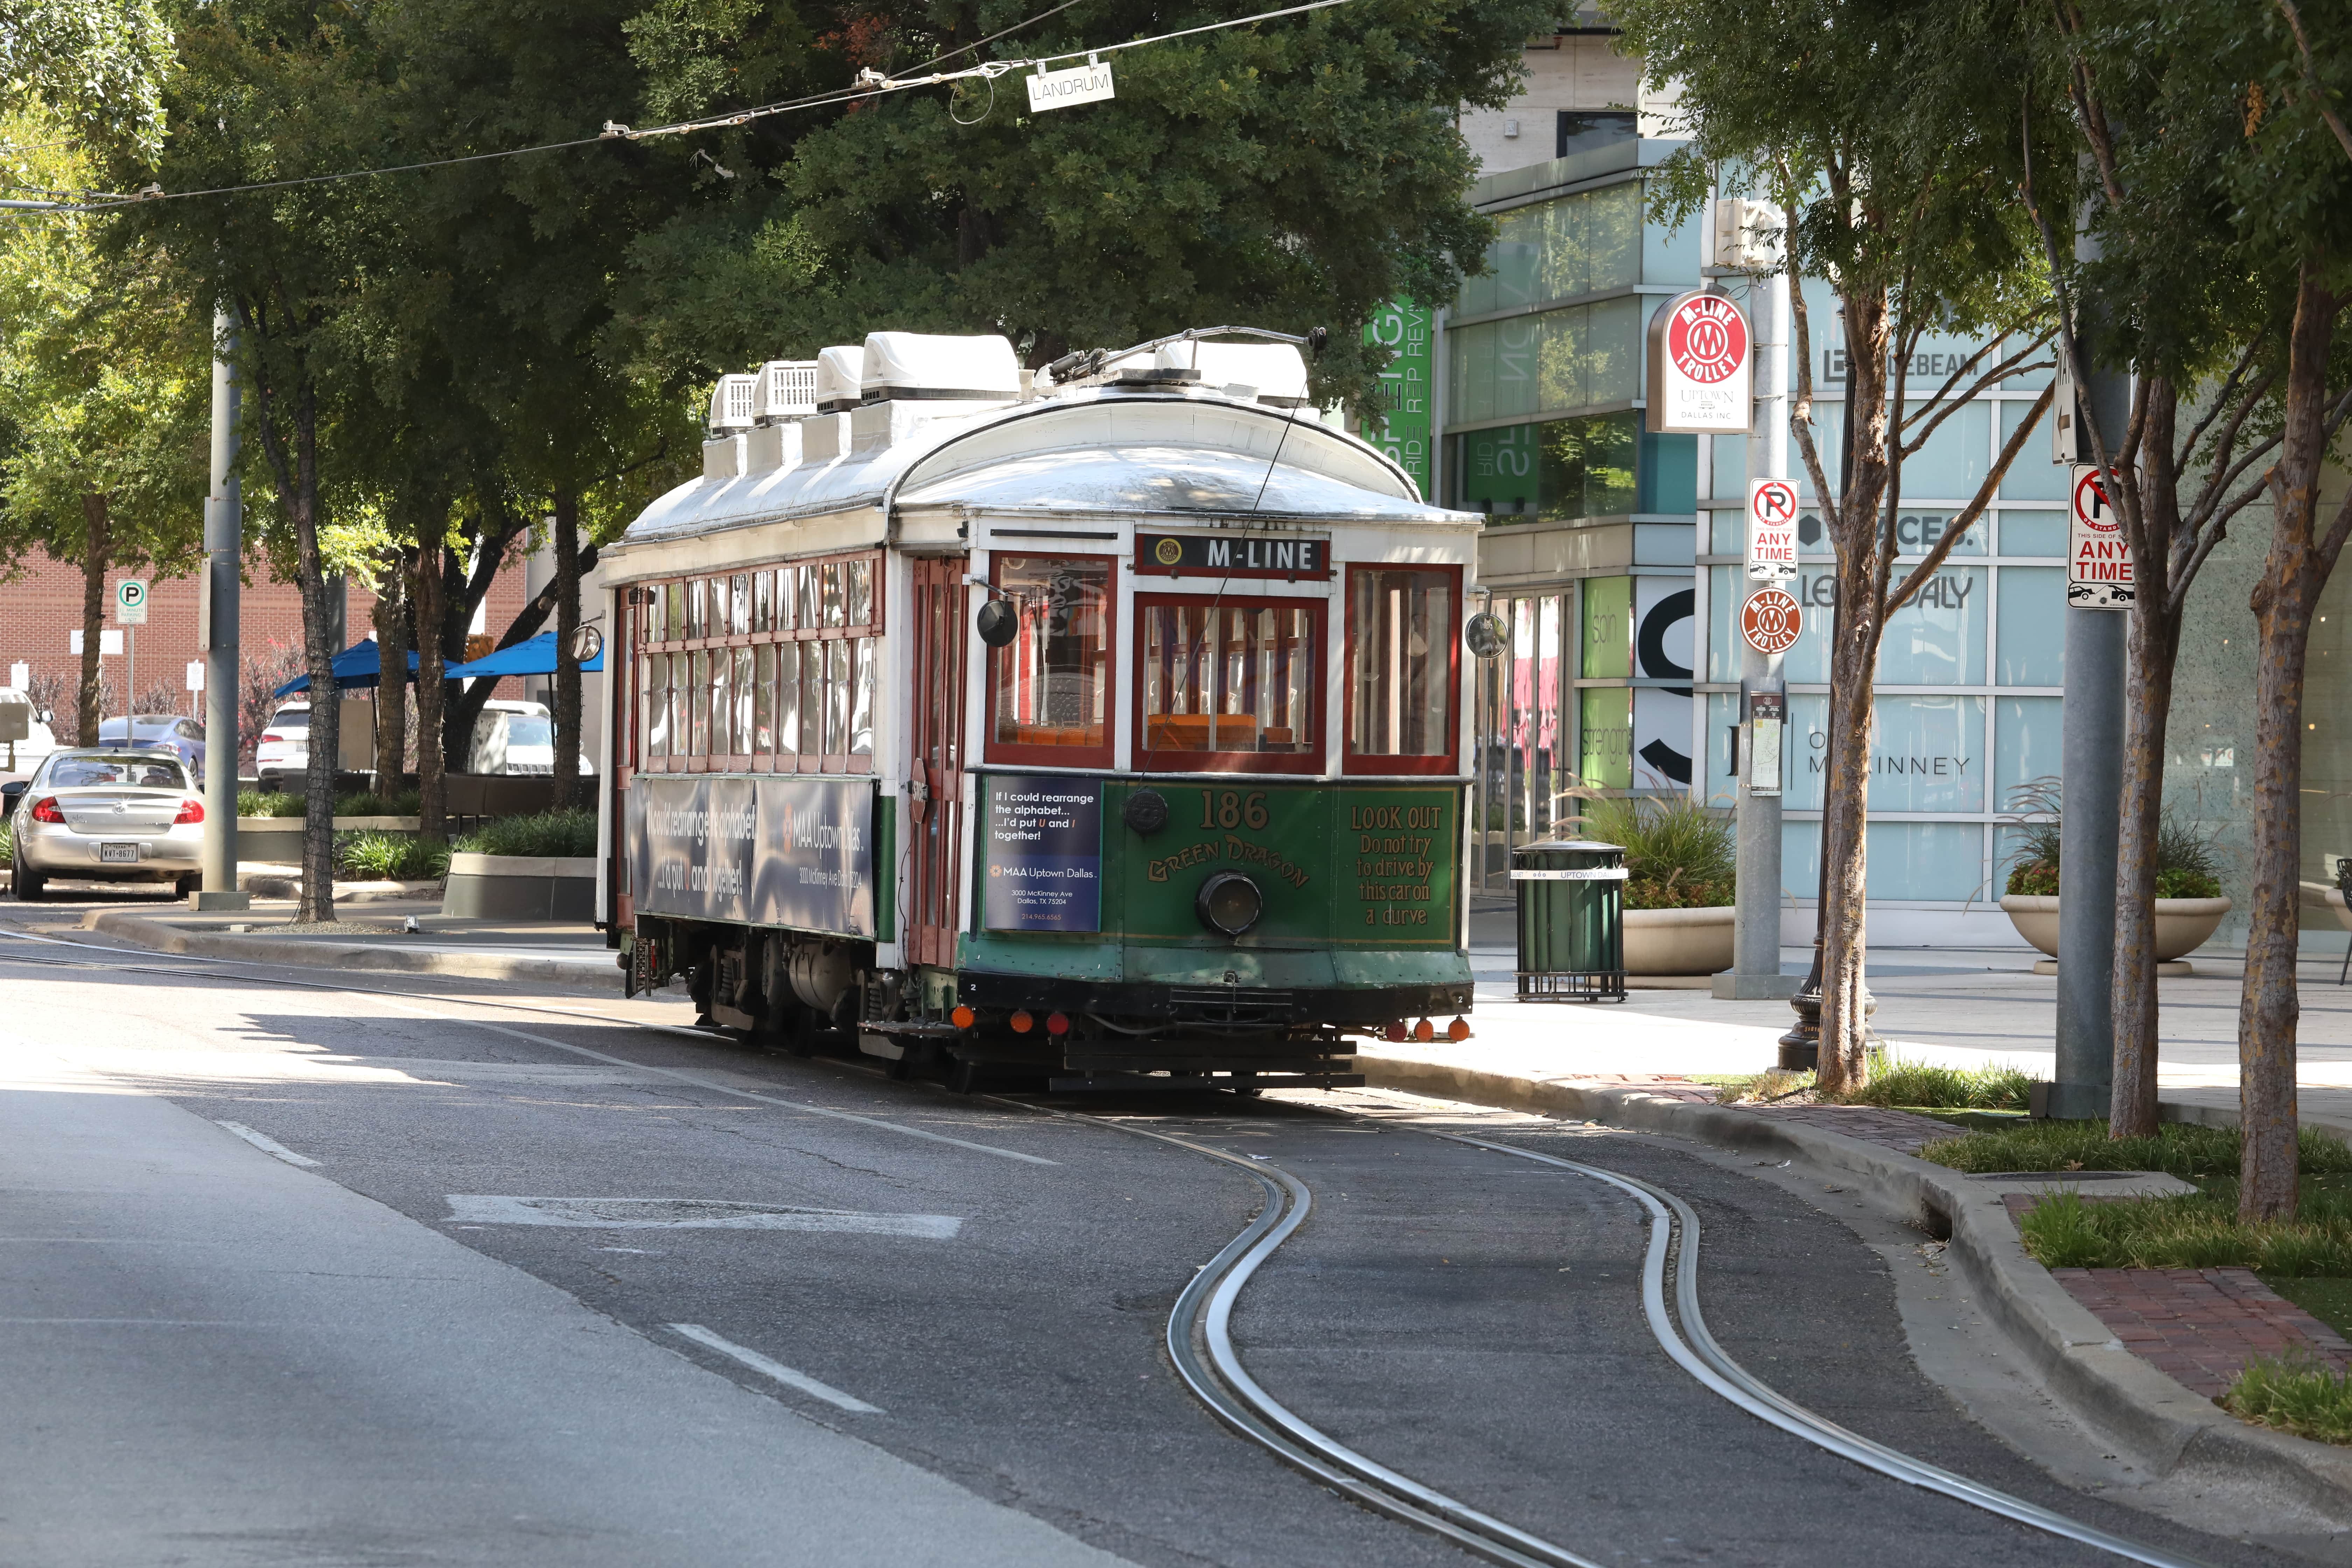 M-Line Trolley traveling